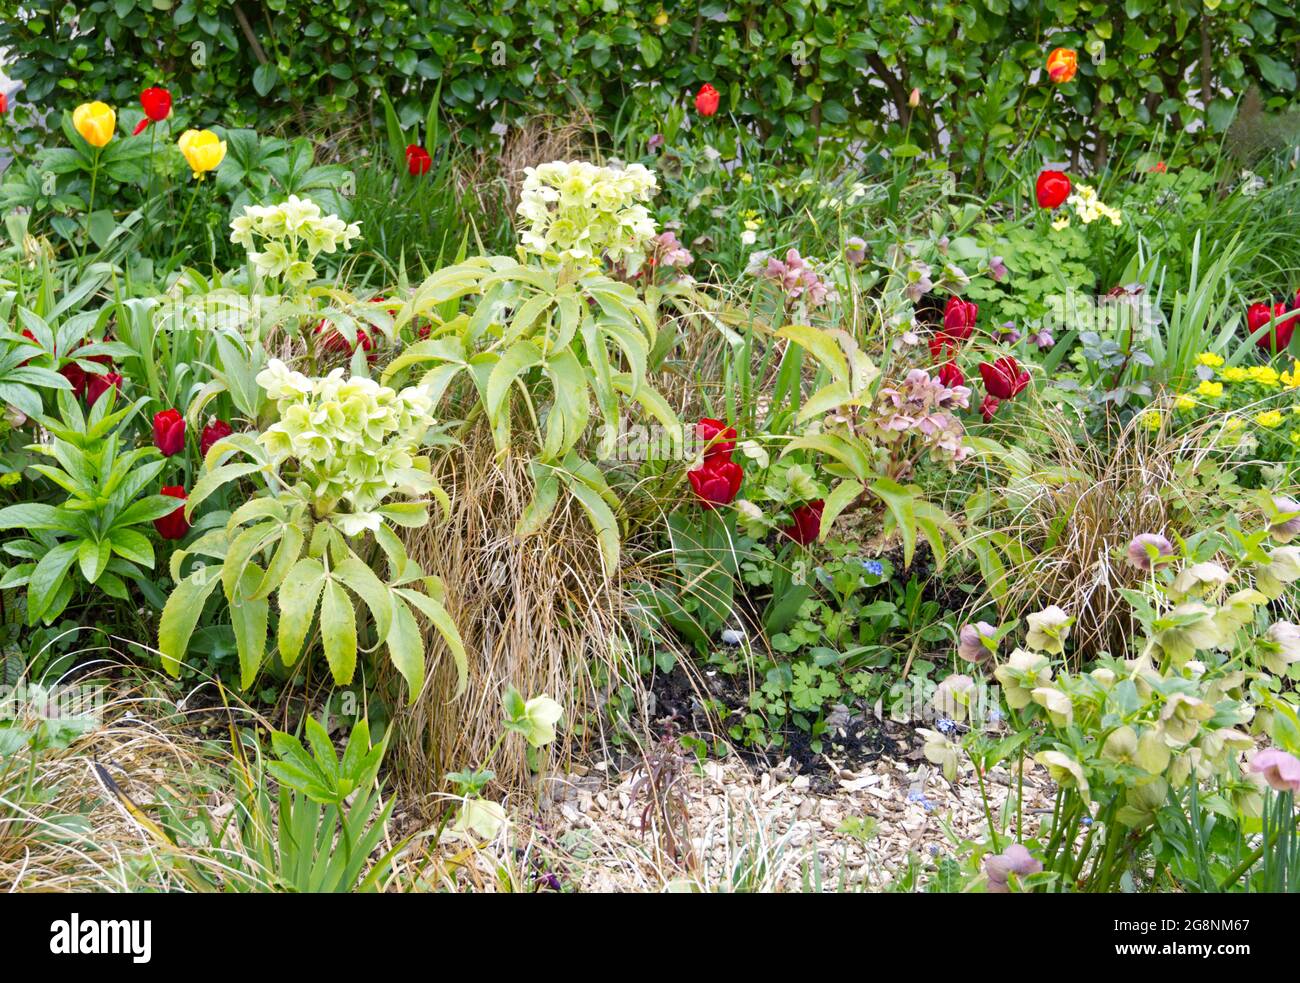 Red Tulip Seadov flowers, hellebore Sternii, euphorbia and bronze carex grass in a spring garden. April UK Stock Photo